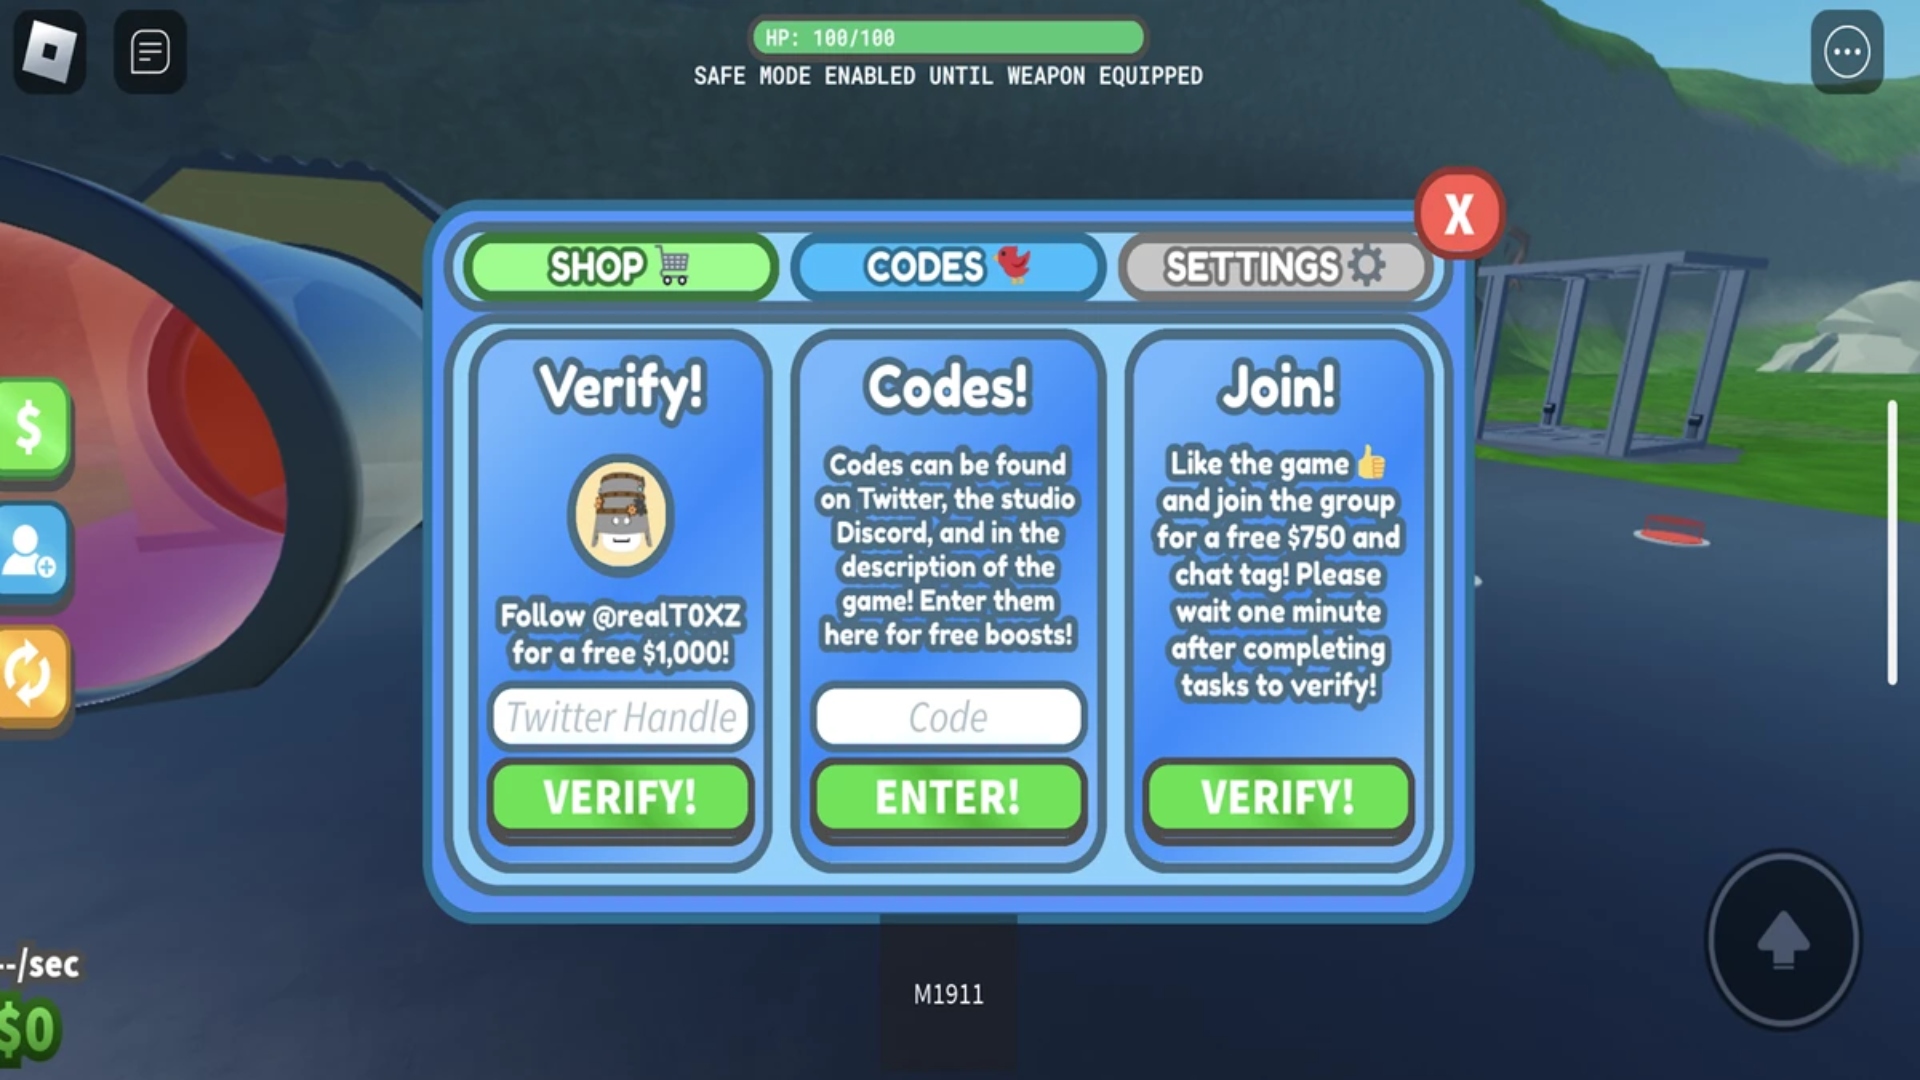 The interface for redeeming War Age Tycoon codes.